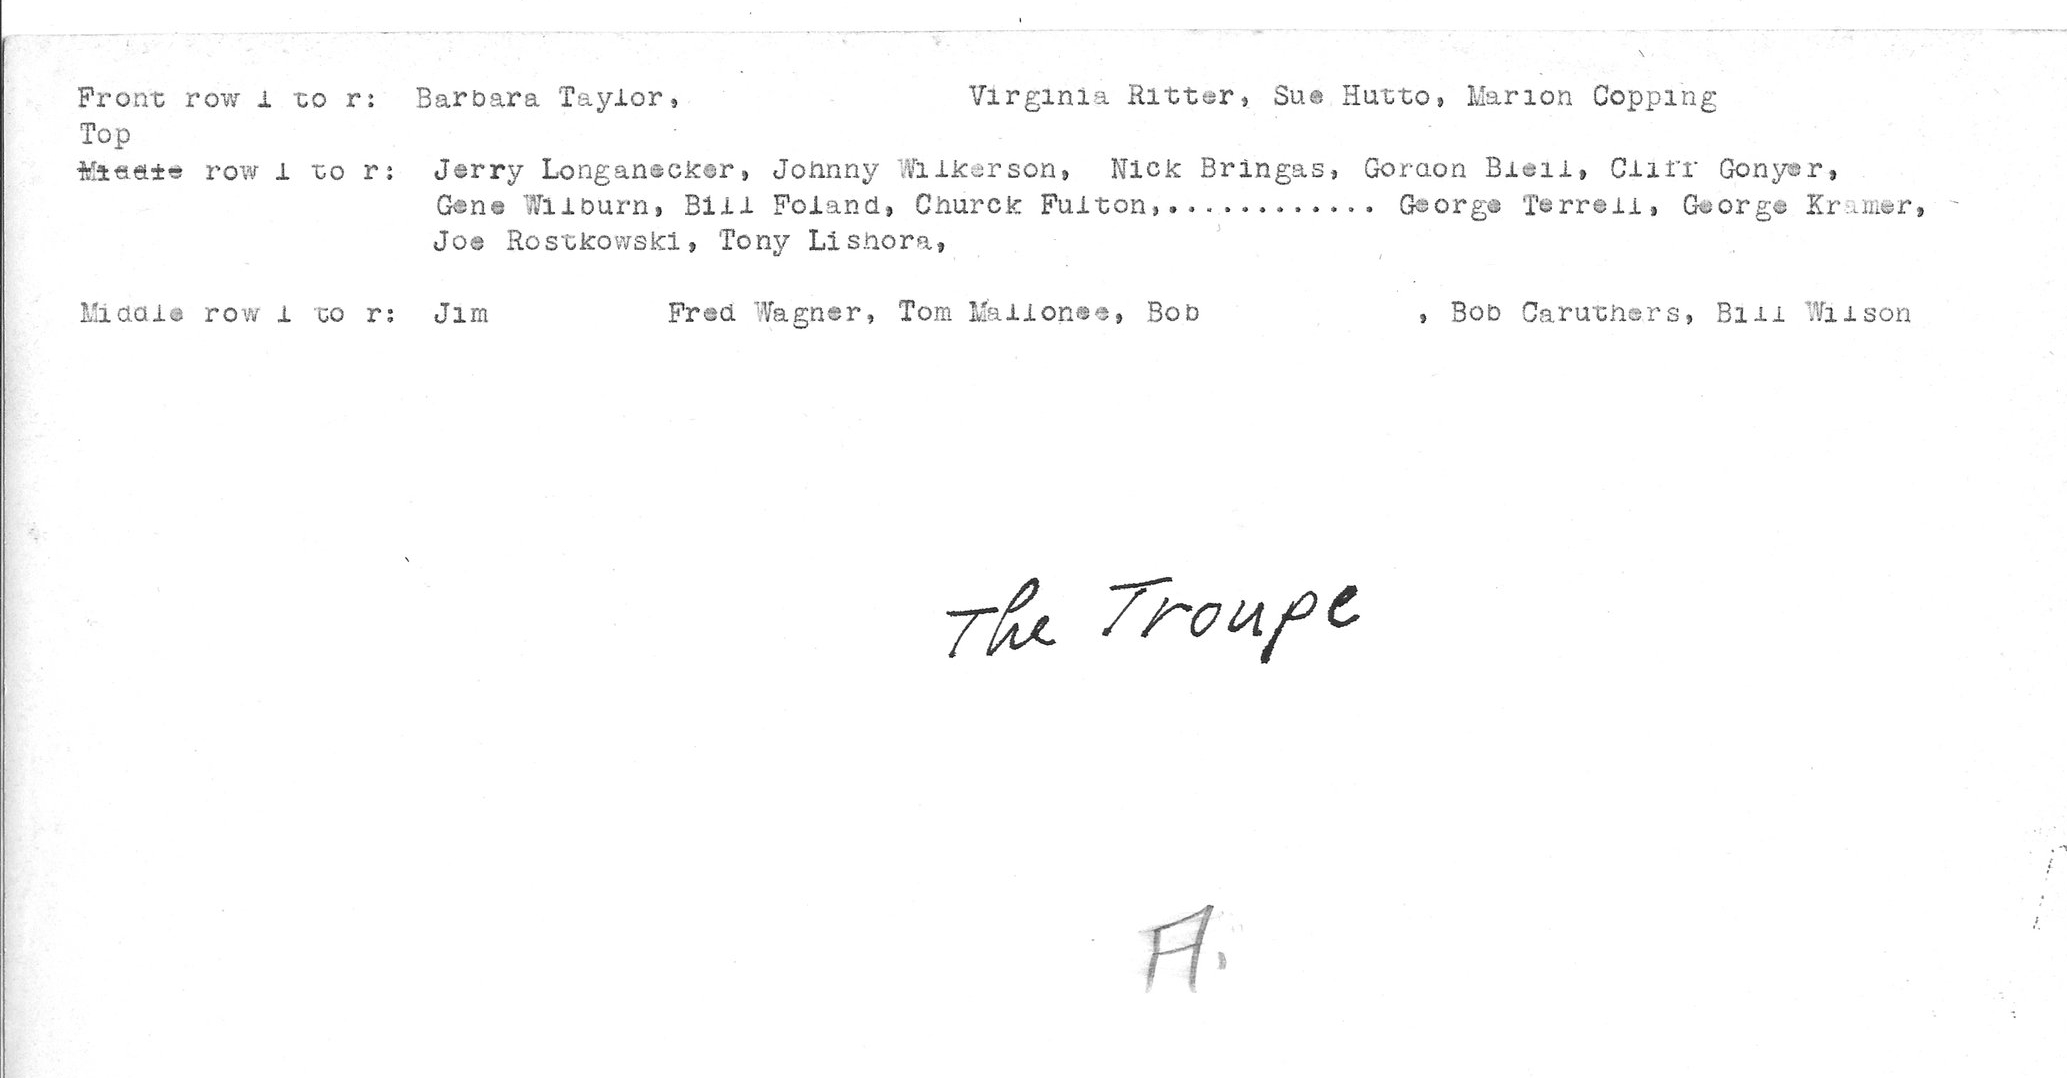 1951 Troupe roster